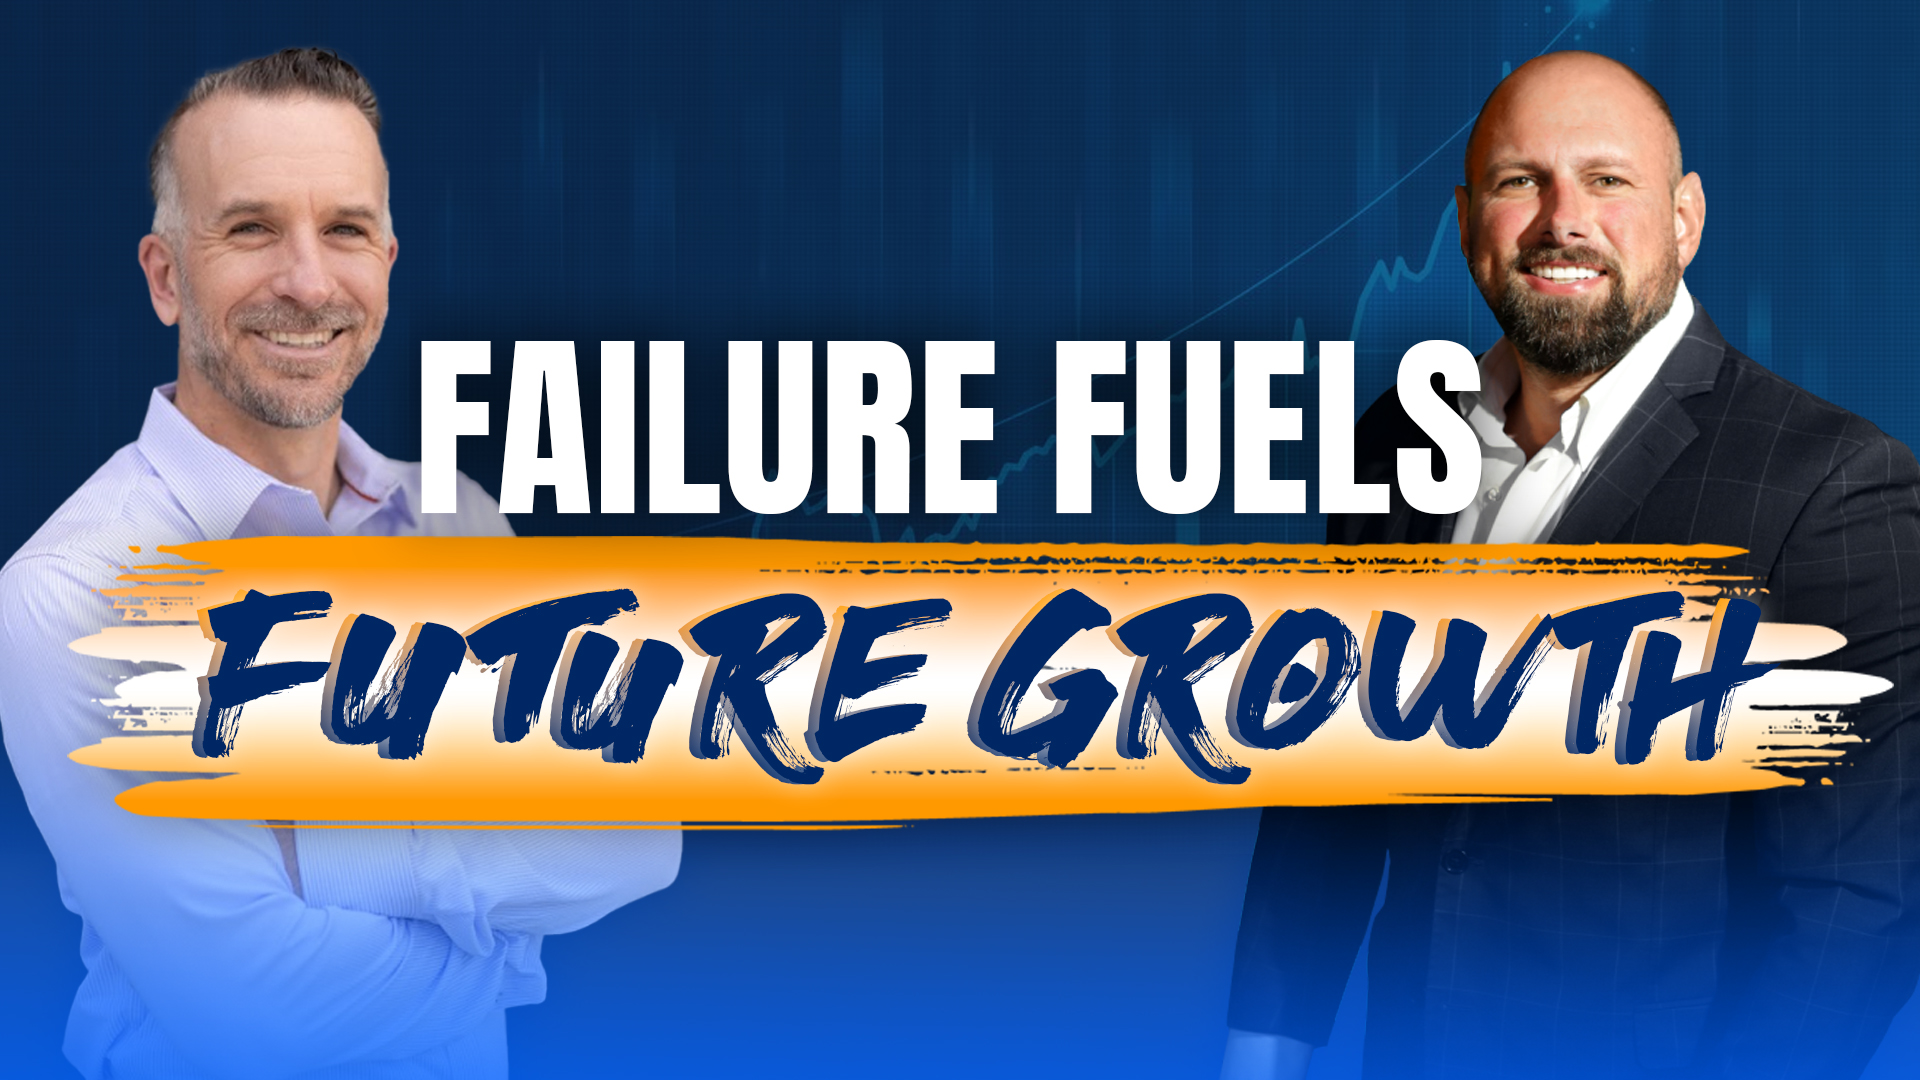 Flow Over Fear: Failure Fuels Future Growth